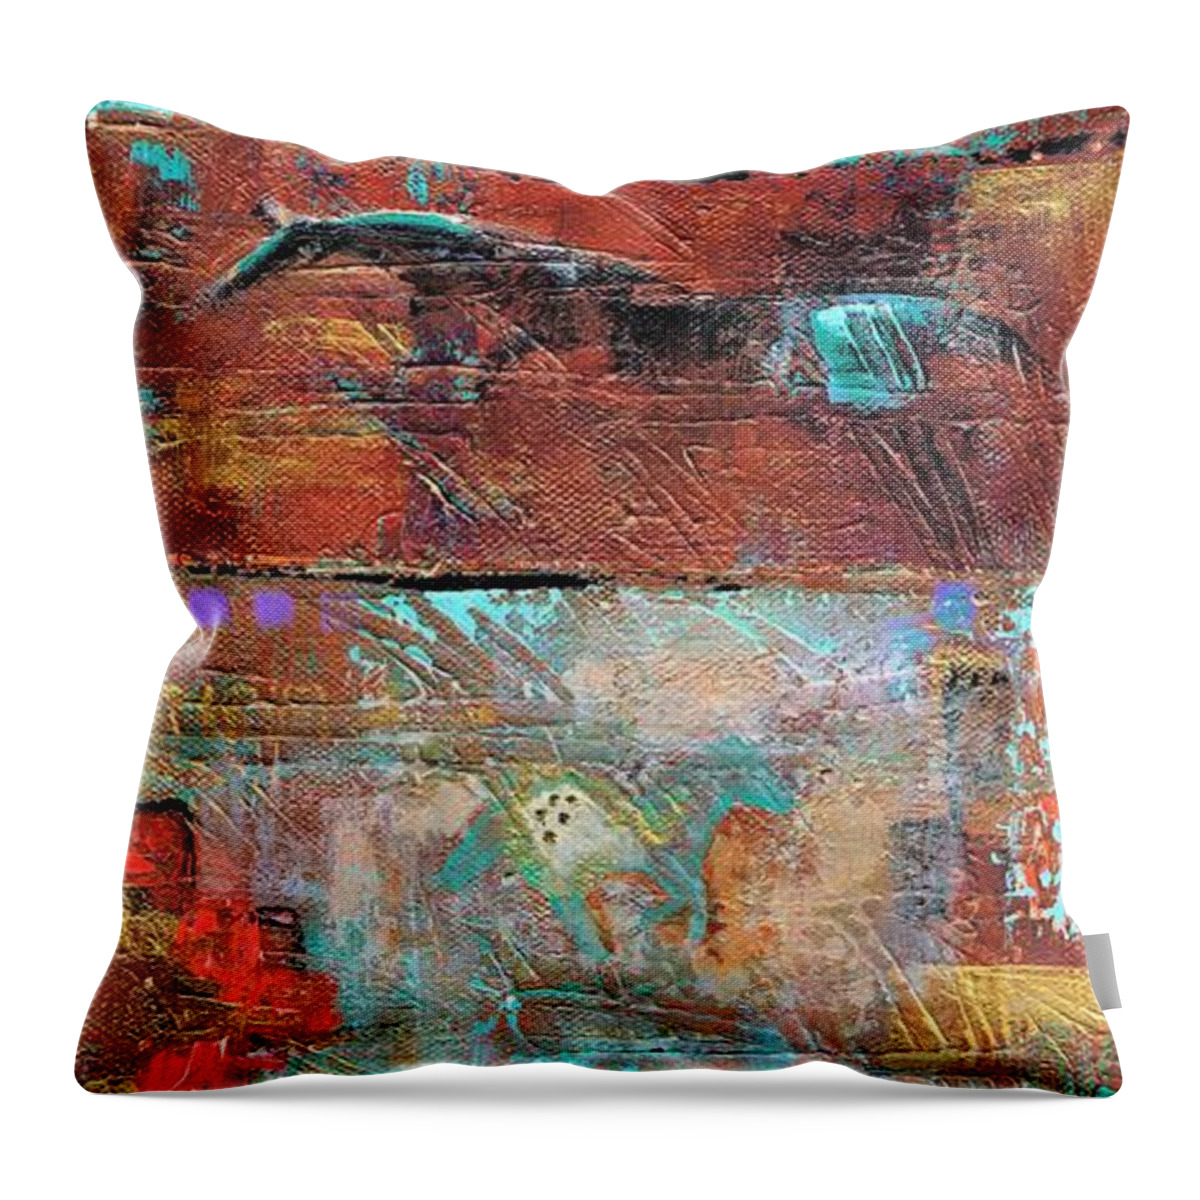 Southwest Art Throw Pillow featuring the painting Southwest Horses by Frances Marino